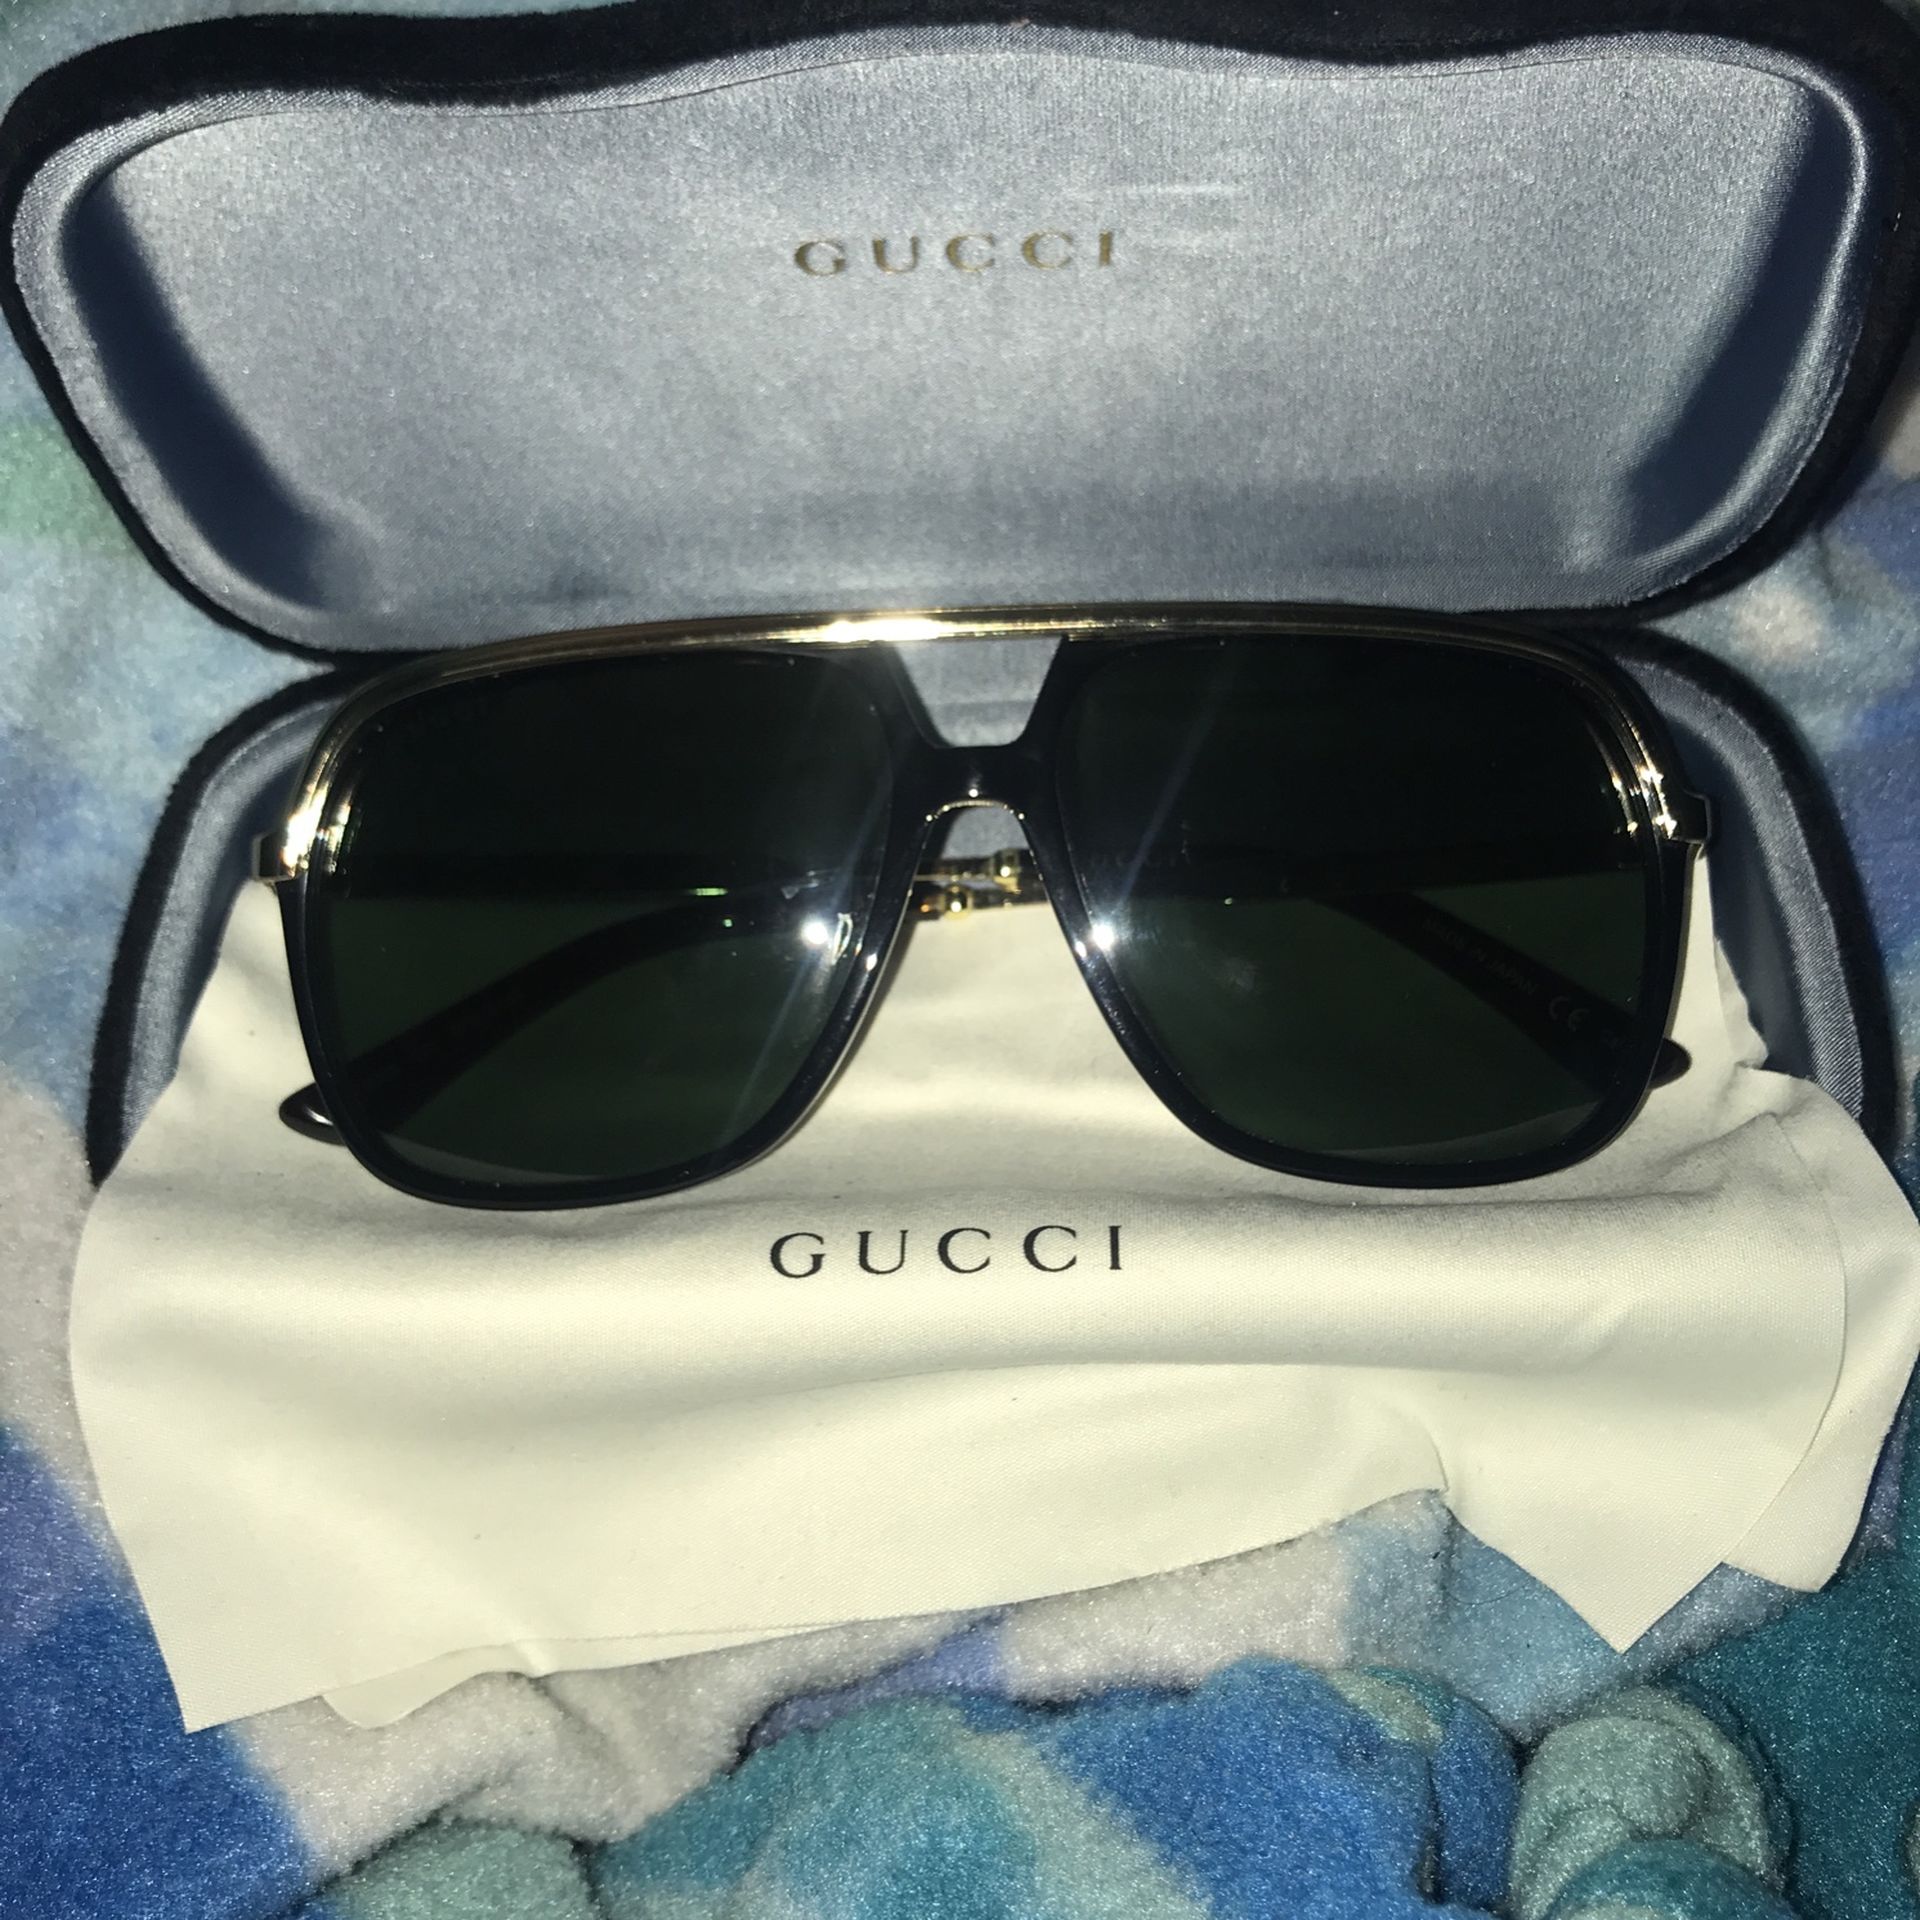 Gucci Unisex Glasses Like New, With Case And Fabric Cleaner.